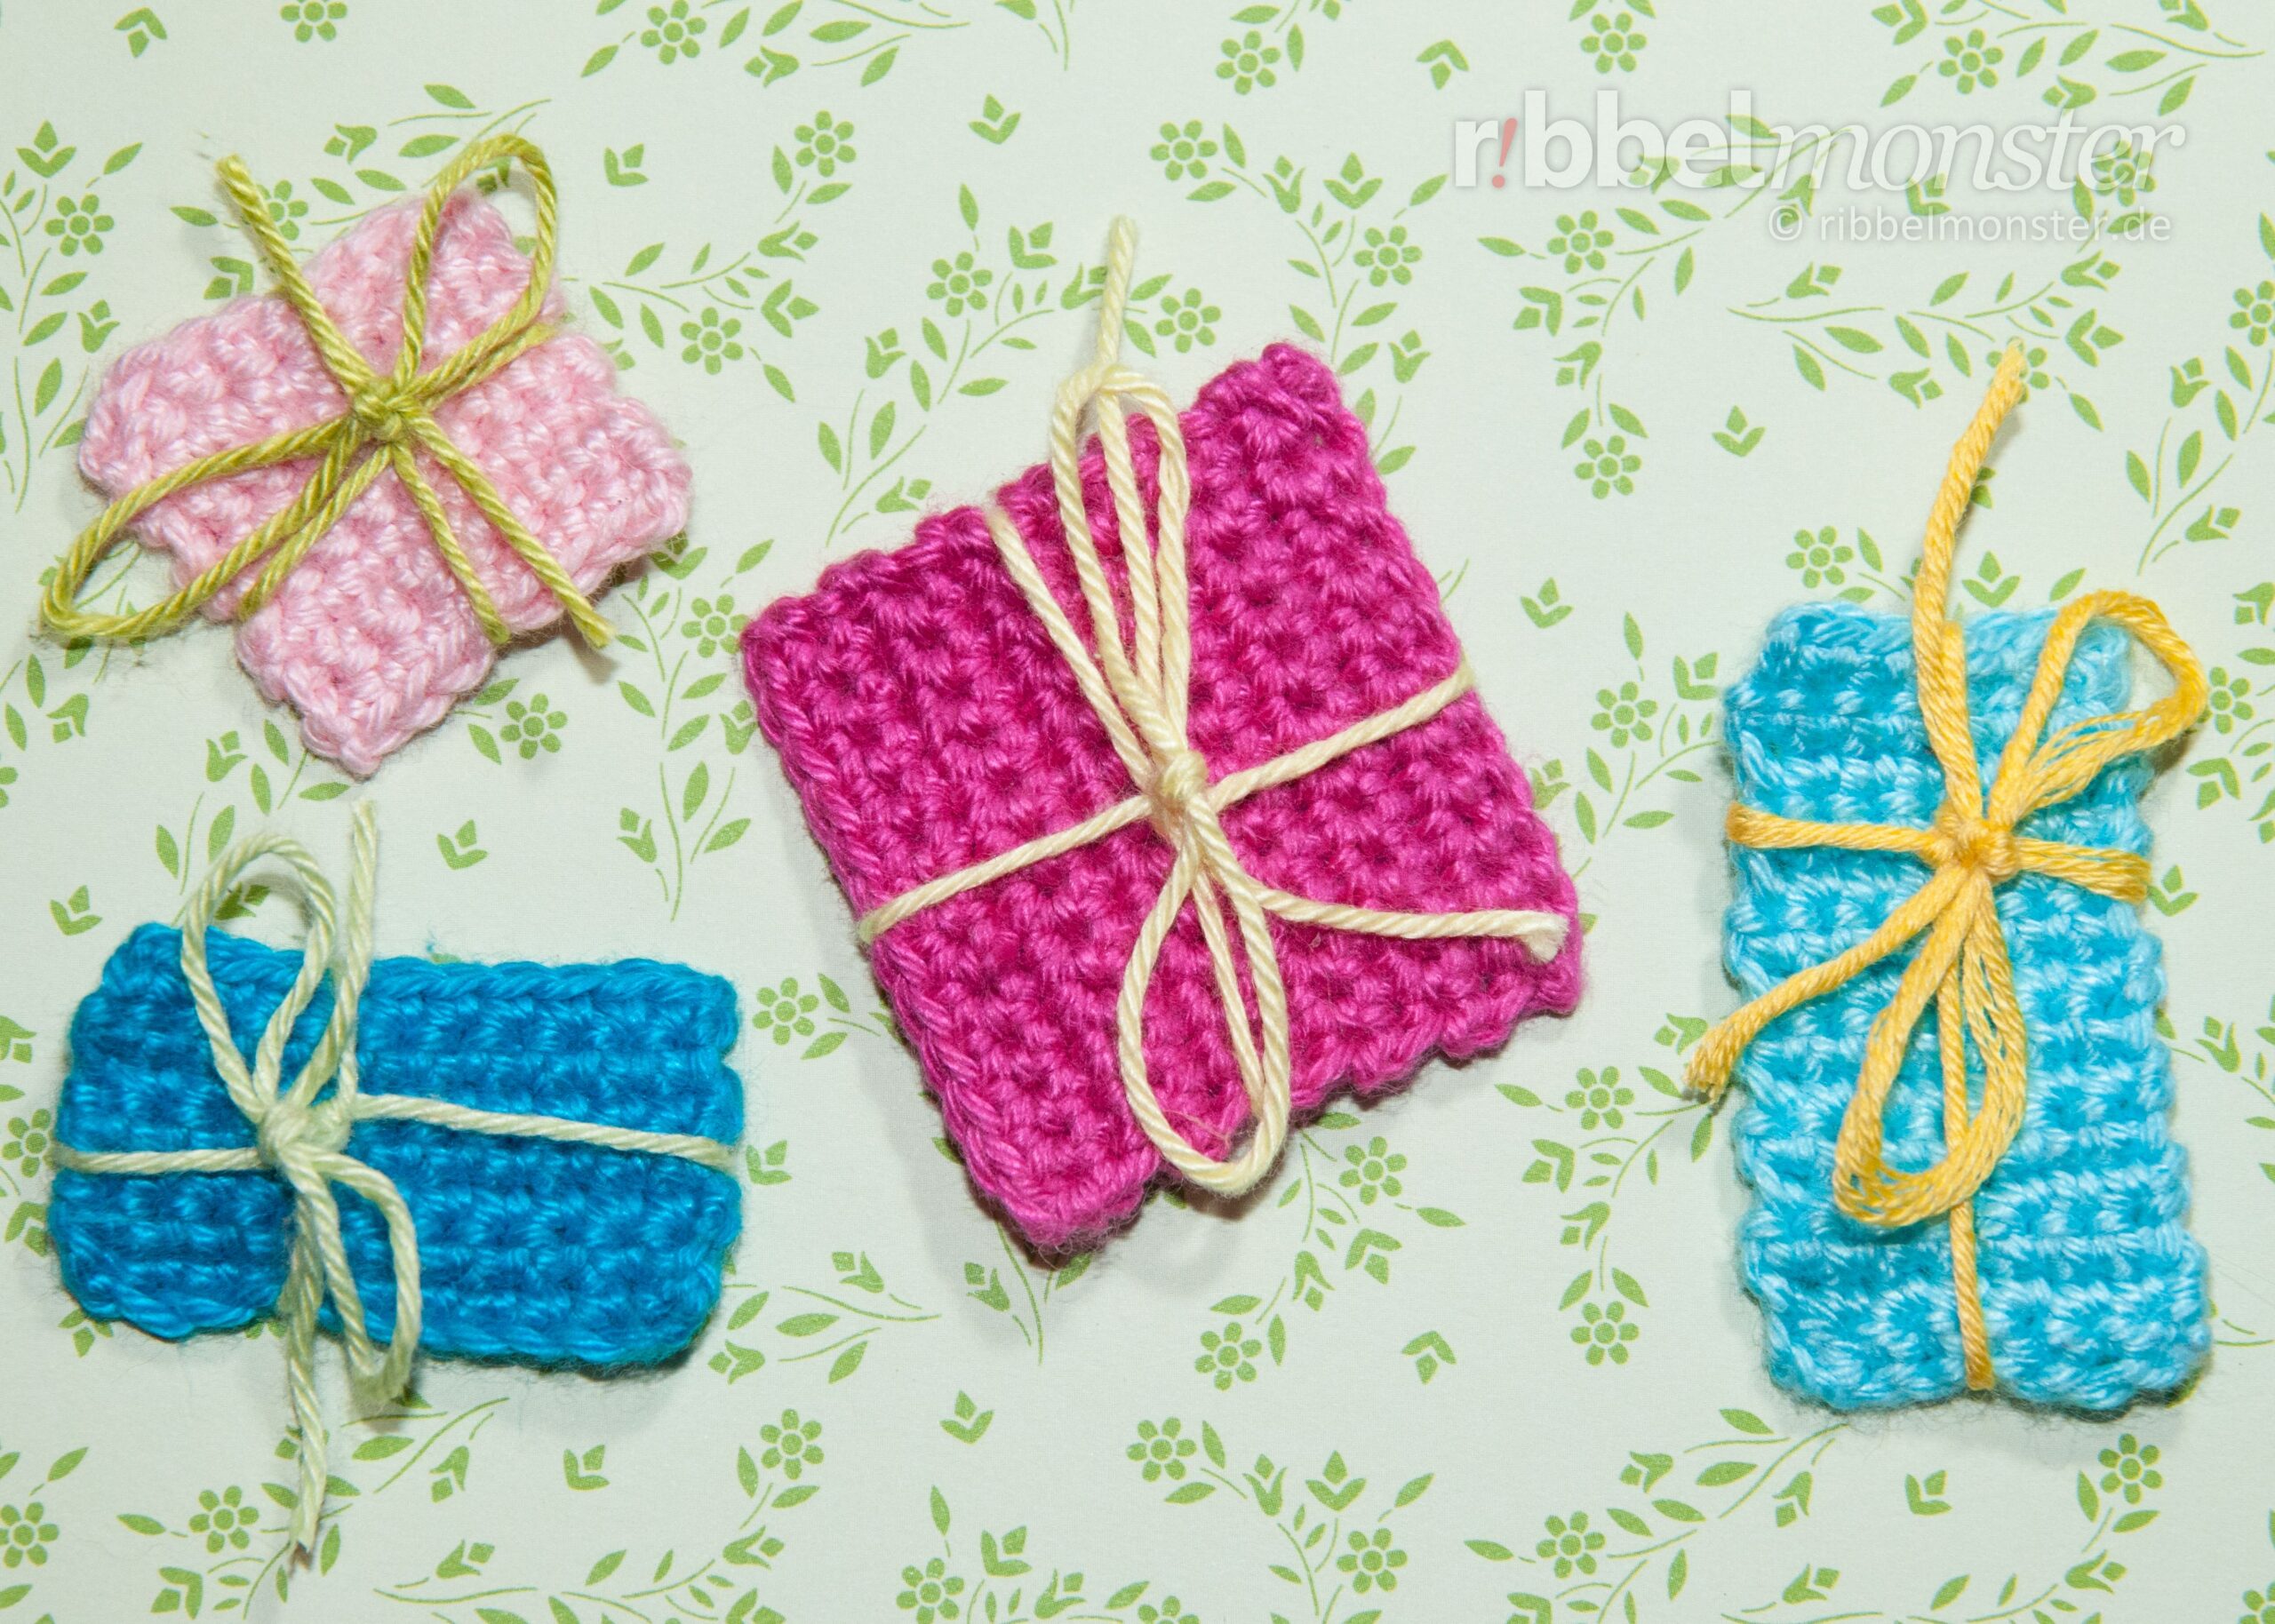 Patch – Crochet Gifts